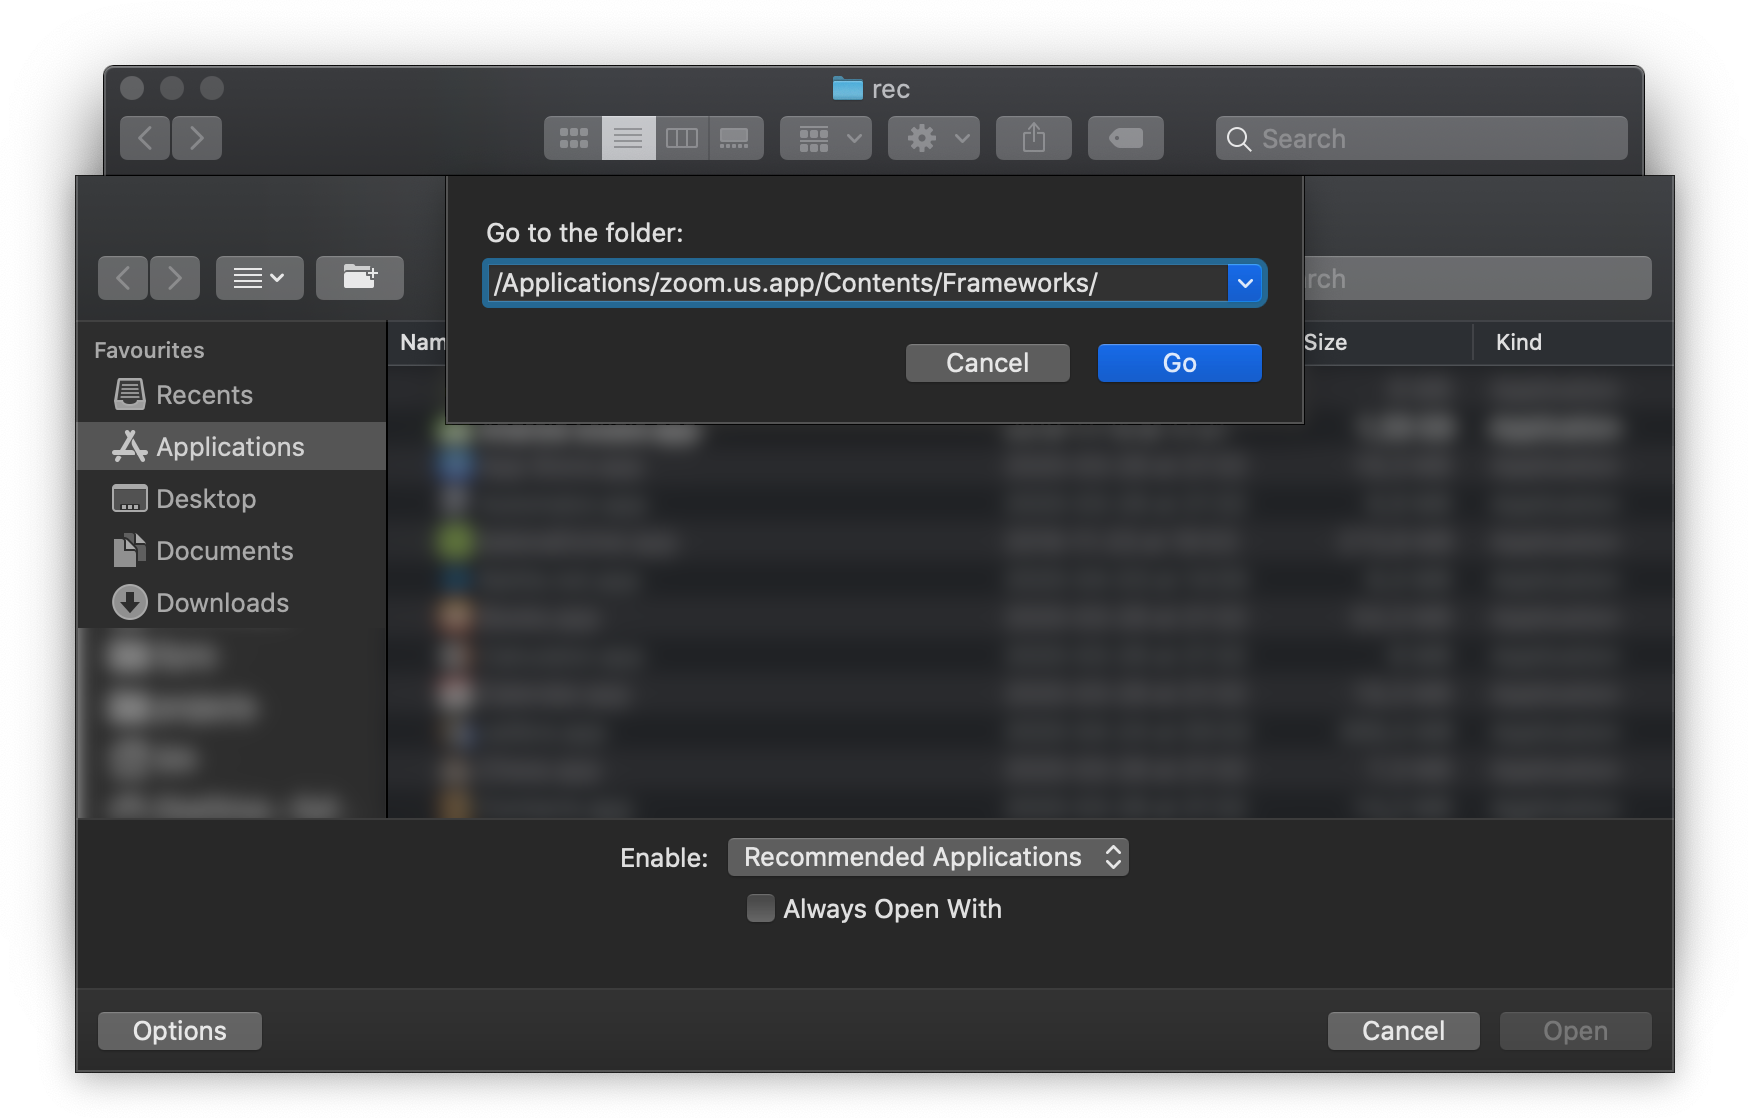 The macOS app selection with an open ‘Go to folder’ dialog. The path ‘/Applications/zoom.us.app/Contents/Frameworks/’ has been typed in.